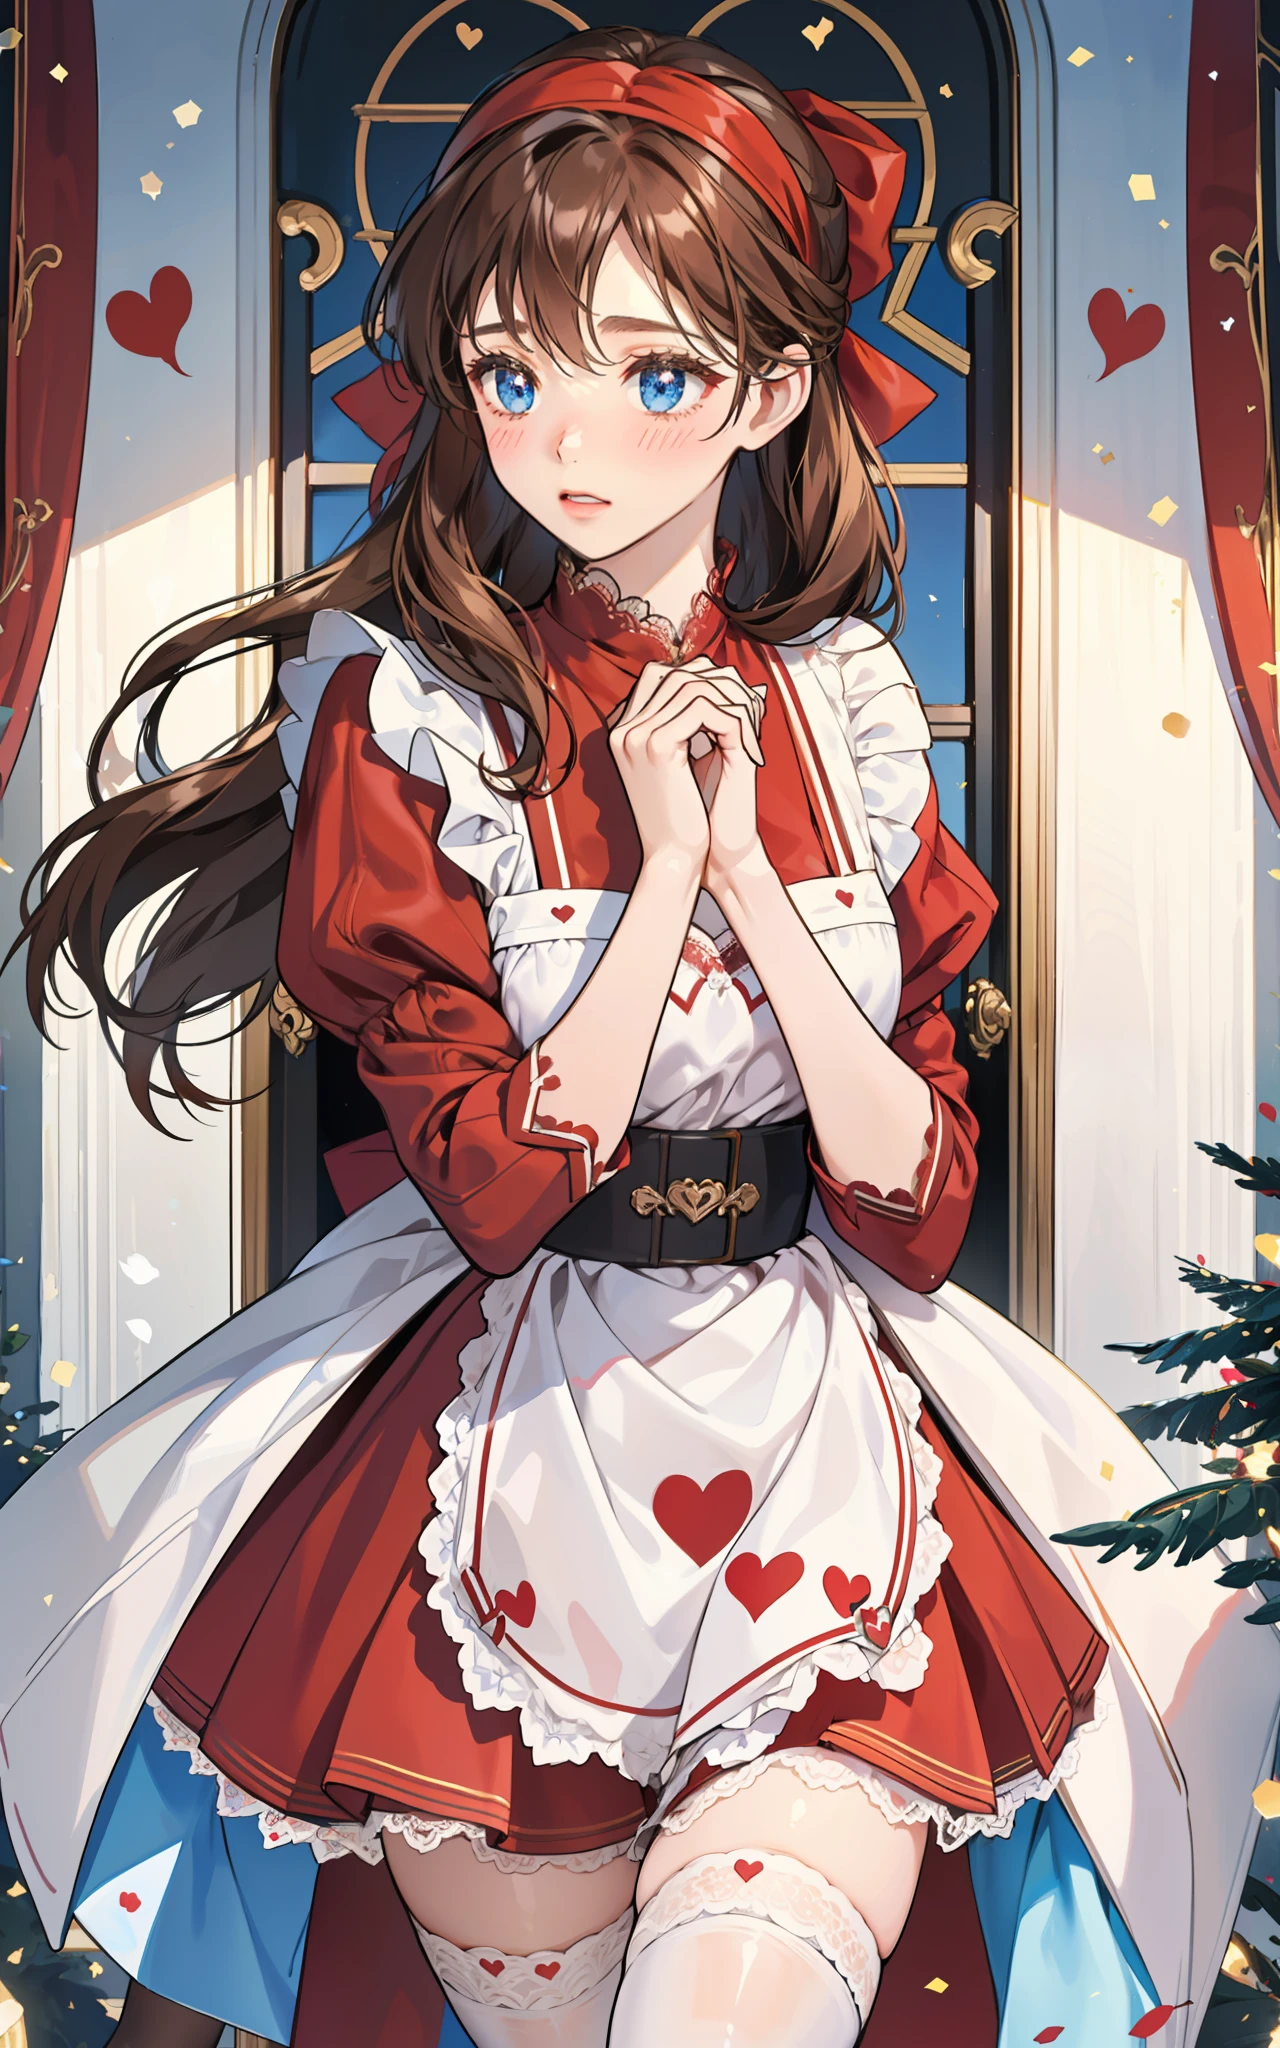 Girl with brown hair and blue eyes, holding with both hands a box of chocolates in the shape of a heart, offering gift with both hands, shy look, blushing, dressed in a red apron and white blouse with lace and black count, red headband, white thigh stockings,